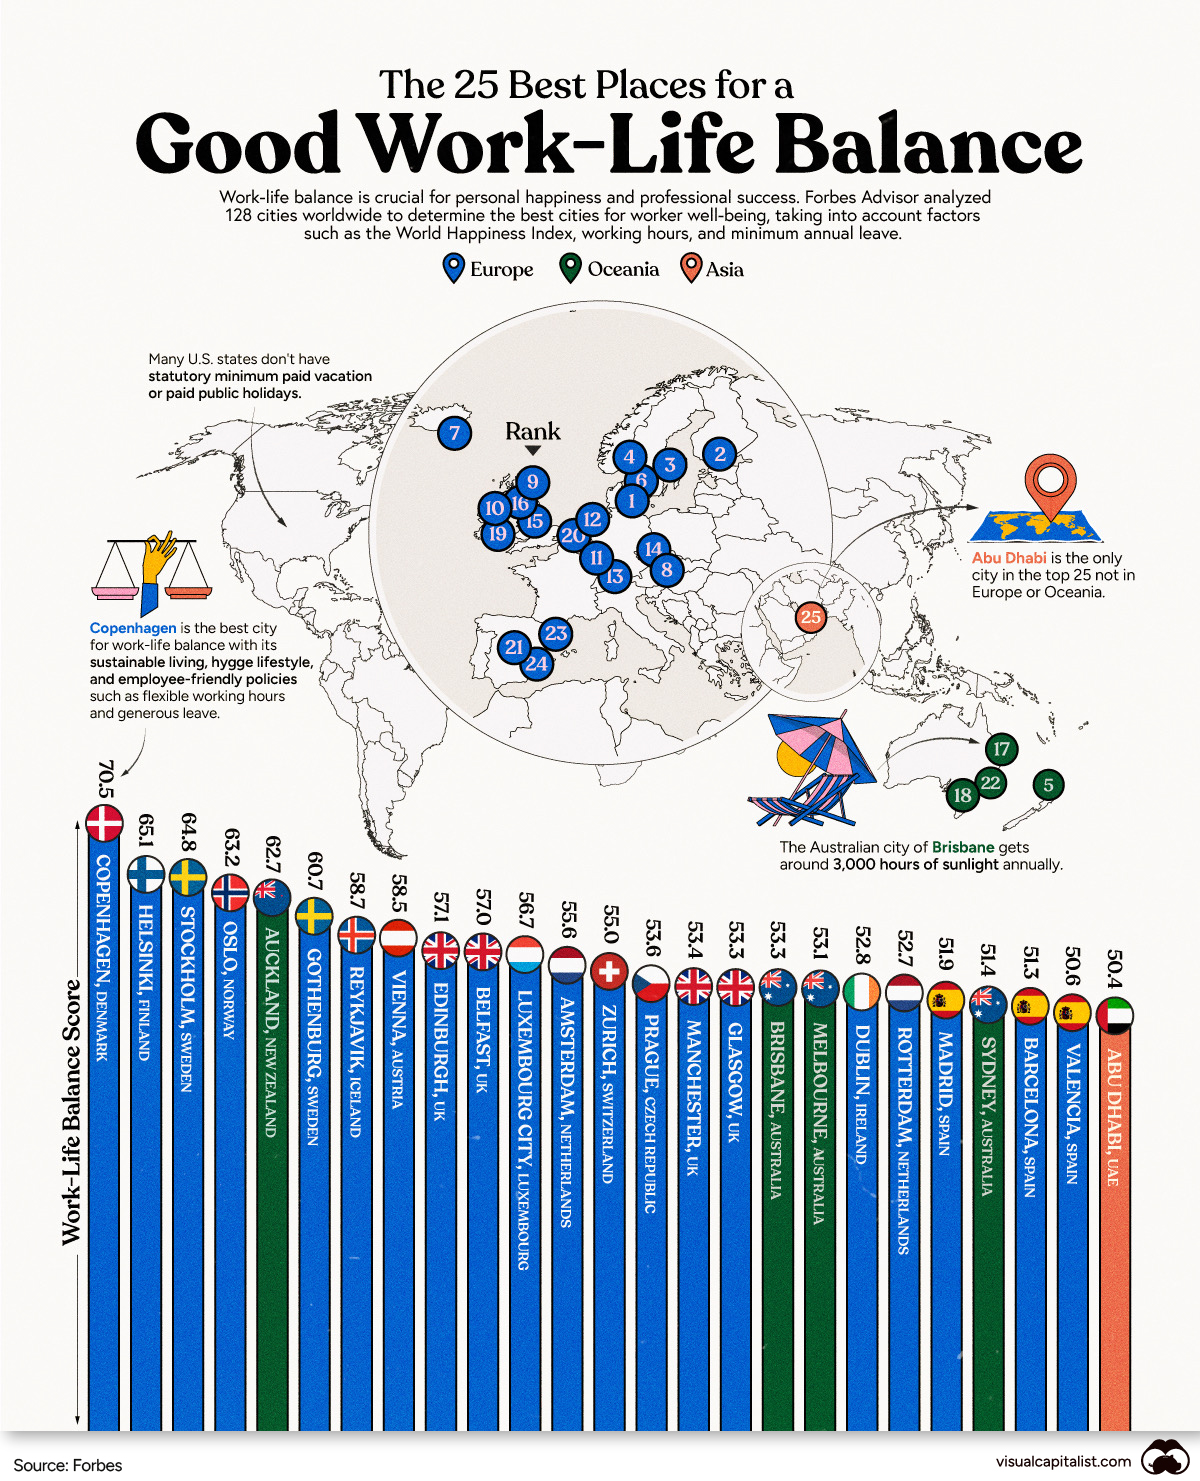 Ranked: The Cities with the Best Work-Life Balance in the World